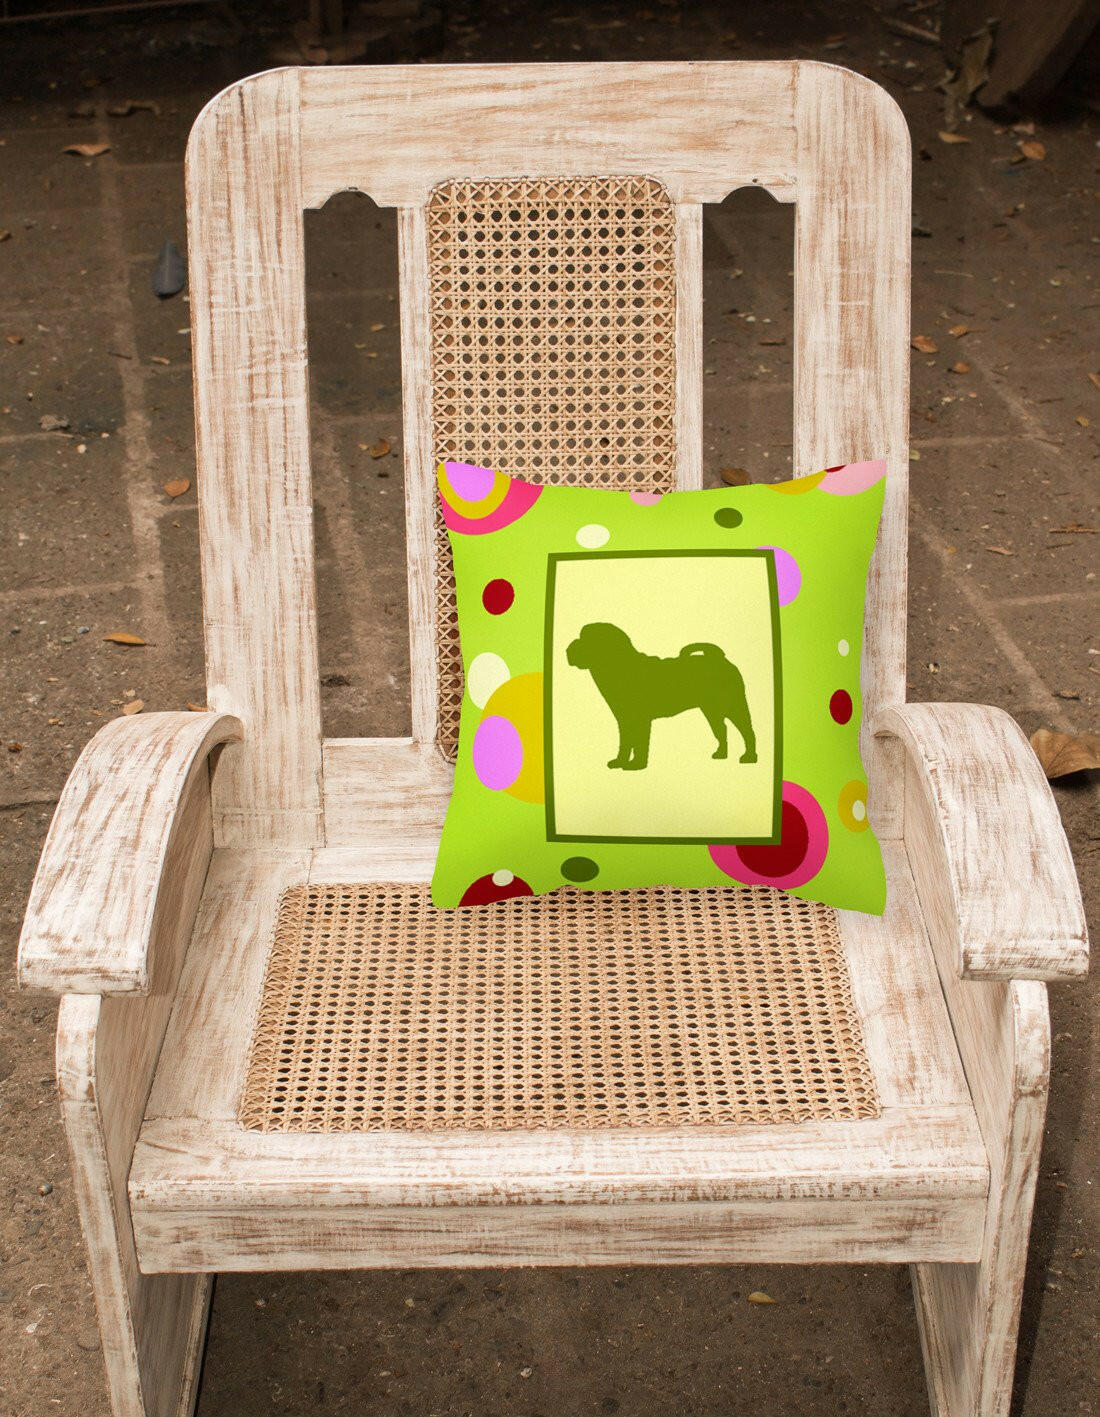 Lime Green Dots Shar Pei Fabric Decorative Pillow CK1124PW1414 by Caroline's Treasures